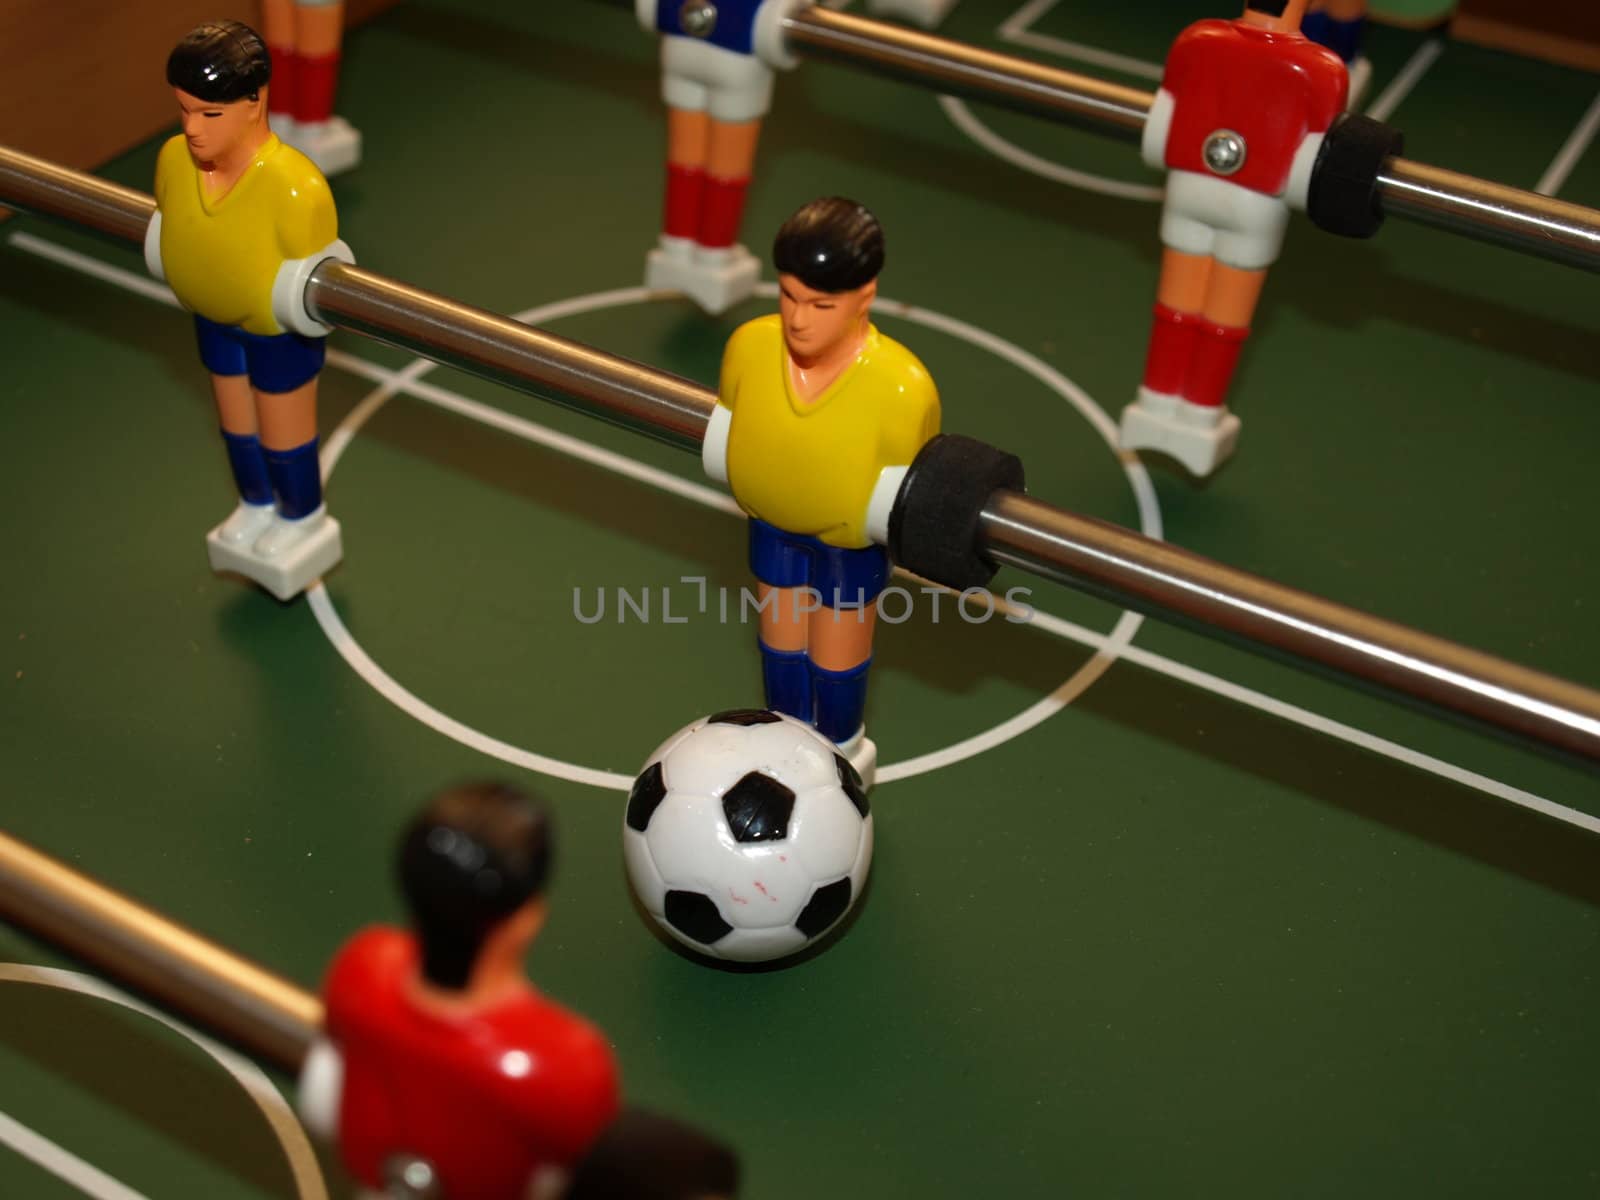 table top soccer shown up close